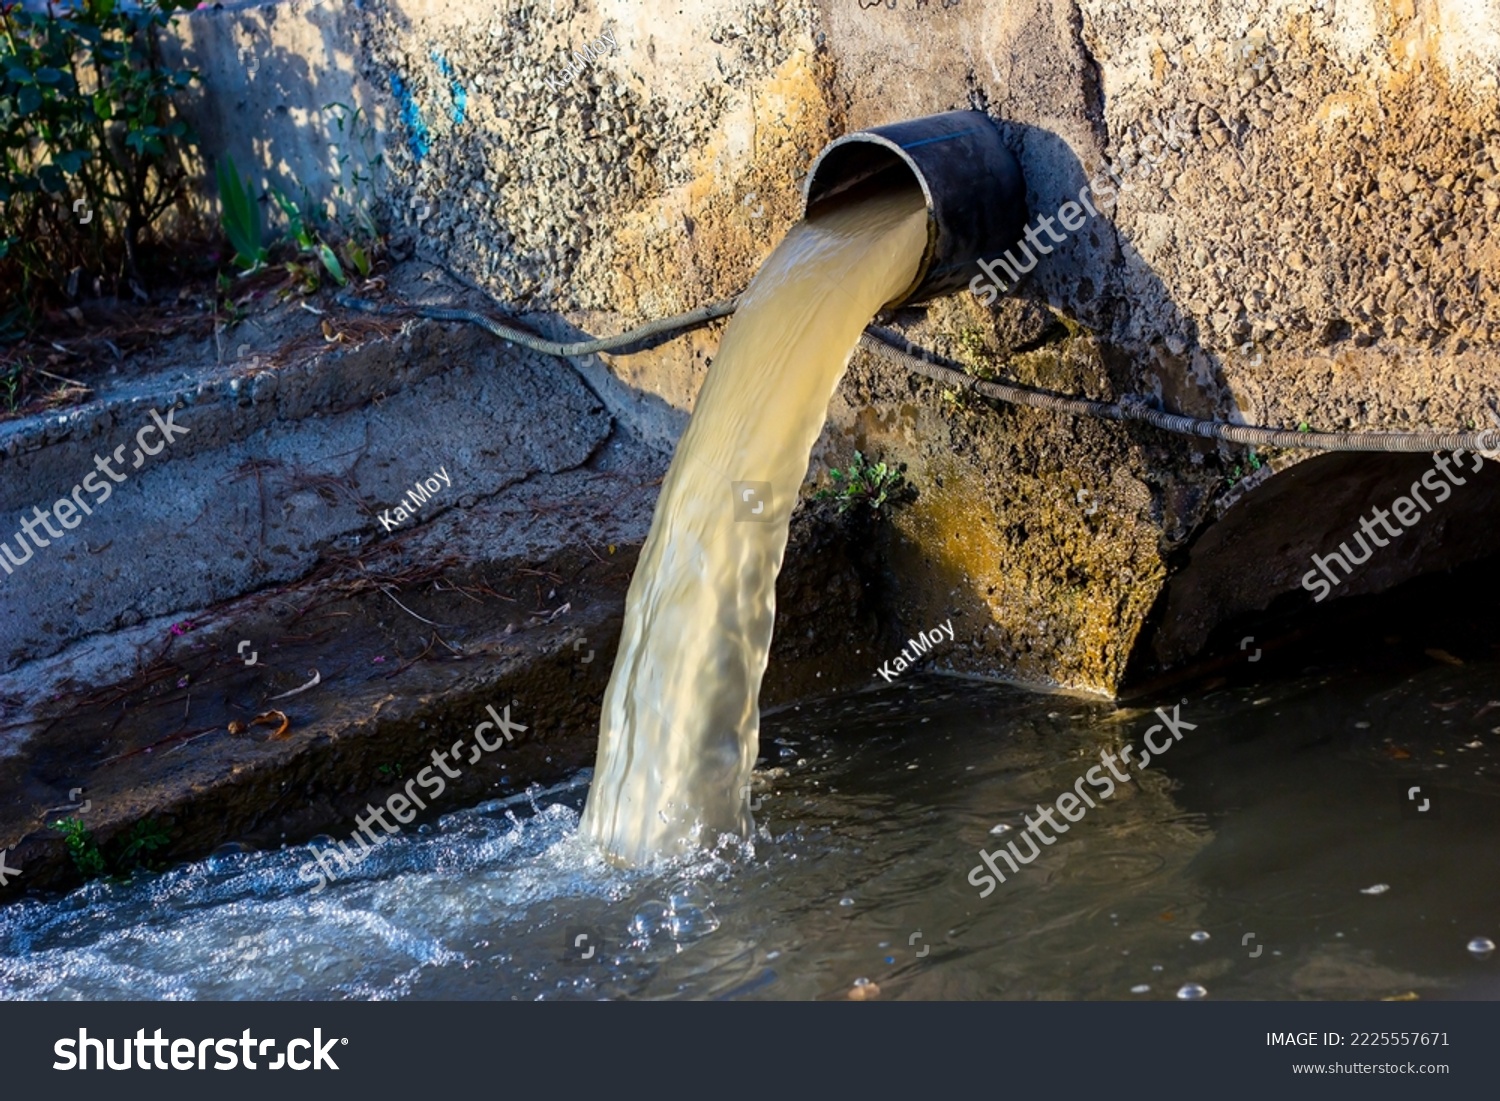 Wastewater sewage pipe dumps the dirty contaminated water into the river. Water pollution, environment contamination concept #2225557671